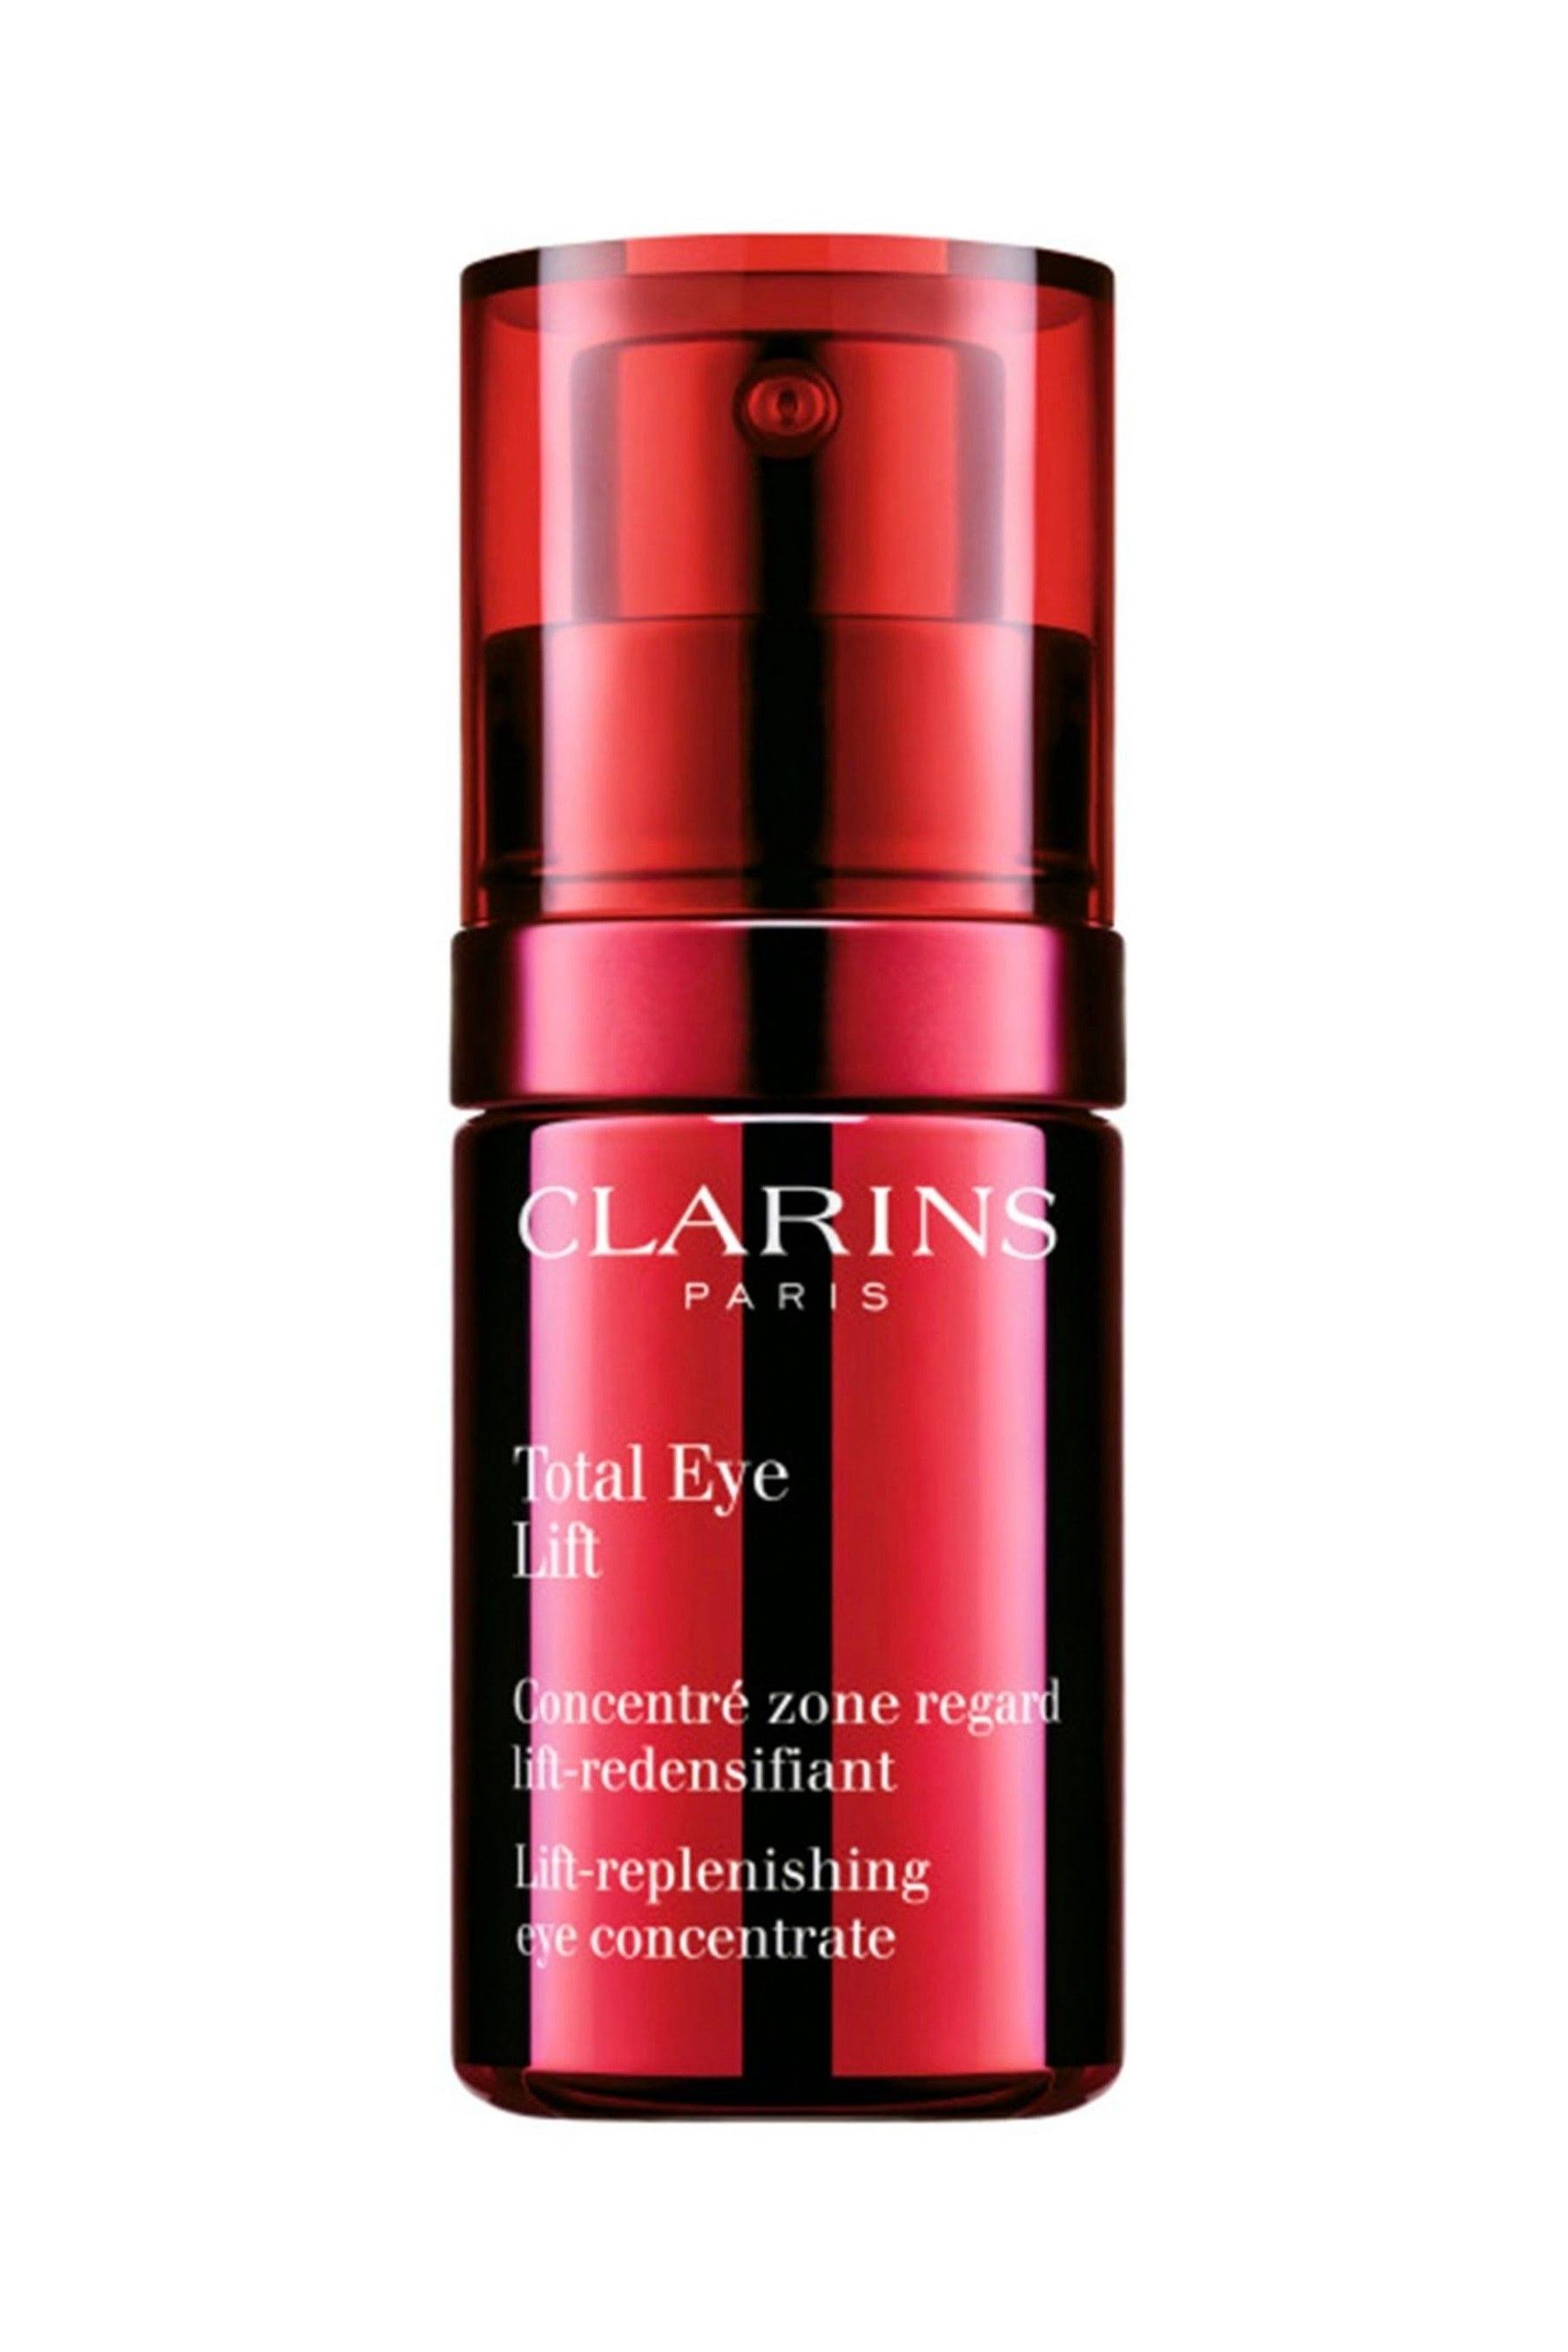 Clarins Total Eye Lift Concentrate 0.5oz / 15ml